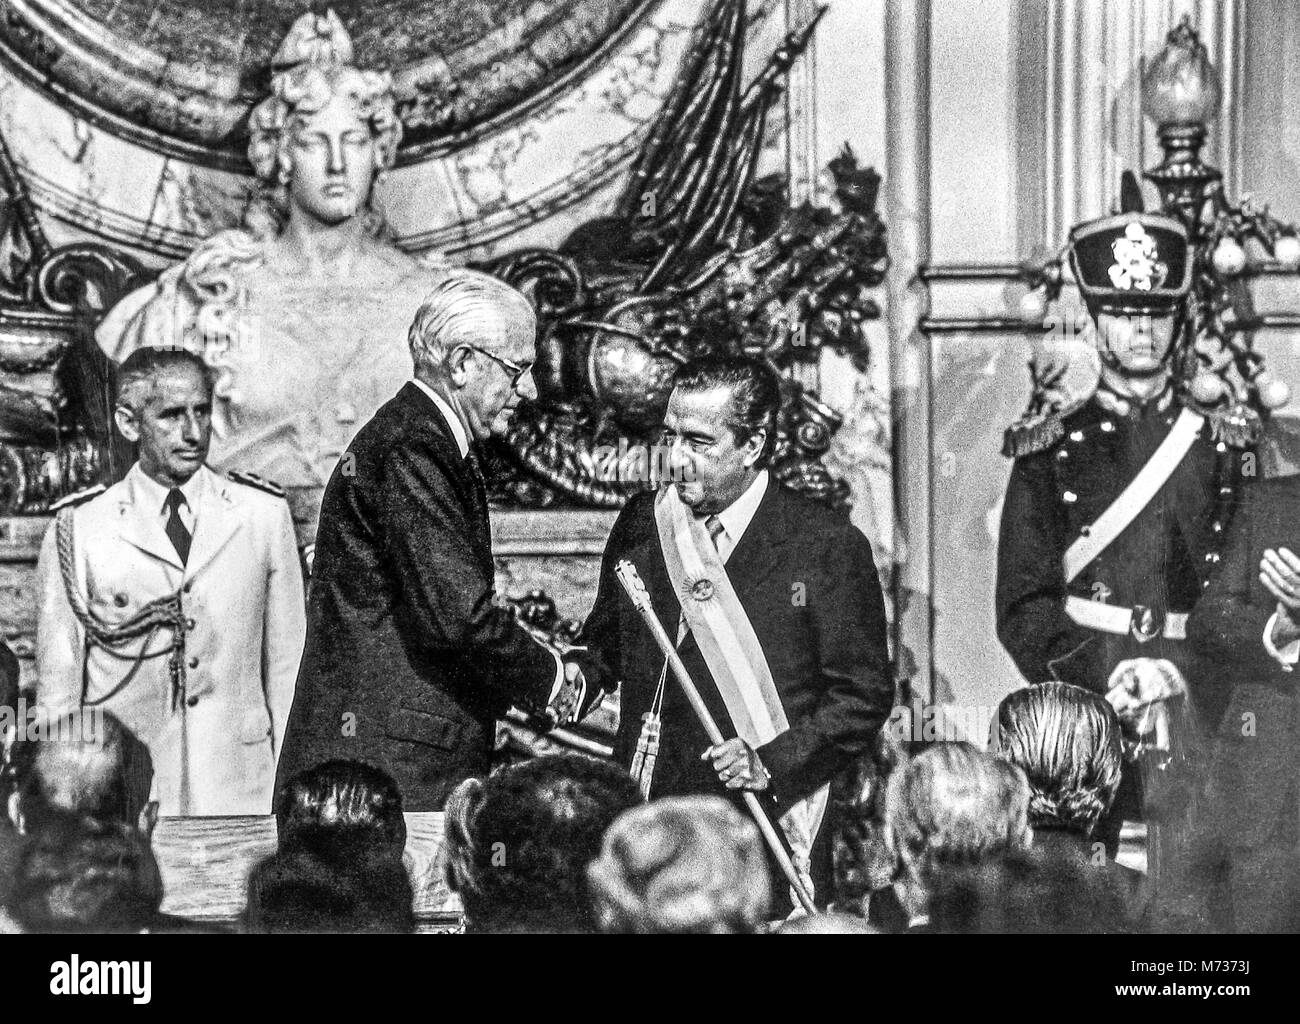 Buenos Aires, Argentina, 10 Dec 1983. File photo of the inauguration ceremony of Argentine President  Raul Alfonsin marking the return of democracy to Argentina after years of military dictatorships. The last de-facto president,  General Reynaldo Bignone (L), shakes hands with Alfonsin after giving him the presidential sash and baton at Buenos Aires government house.  Bignone died on March 7, 2018.  Photo by Enrique Shore Stock Photo